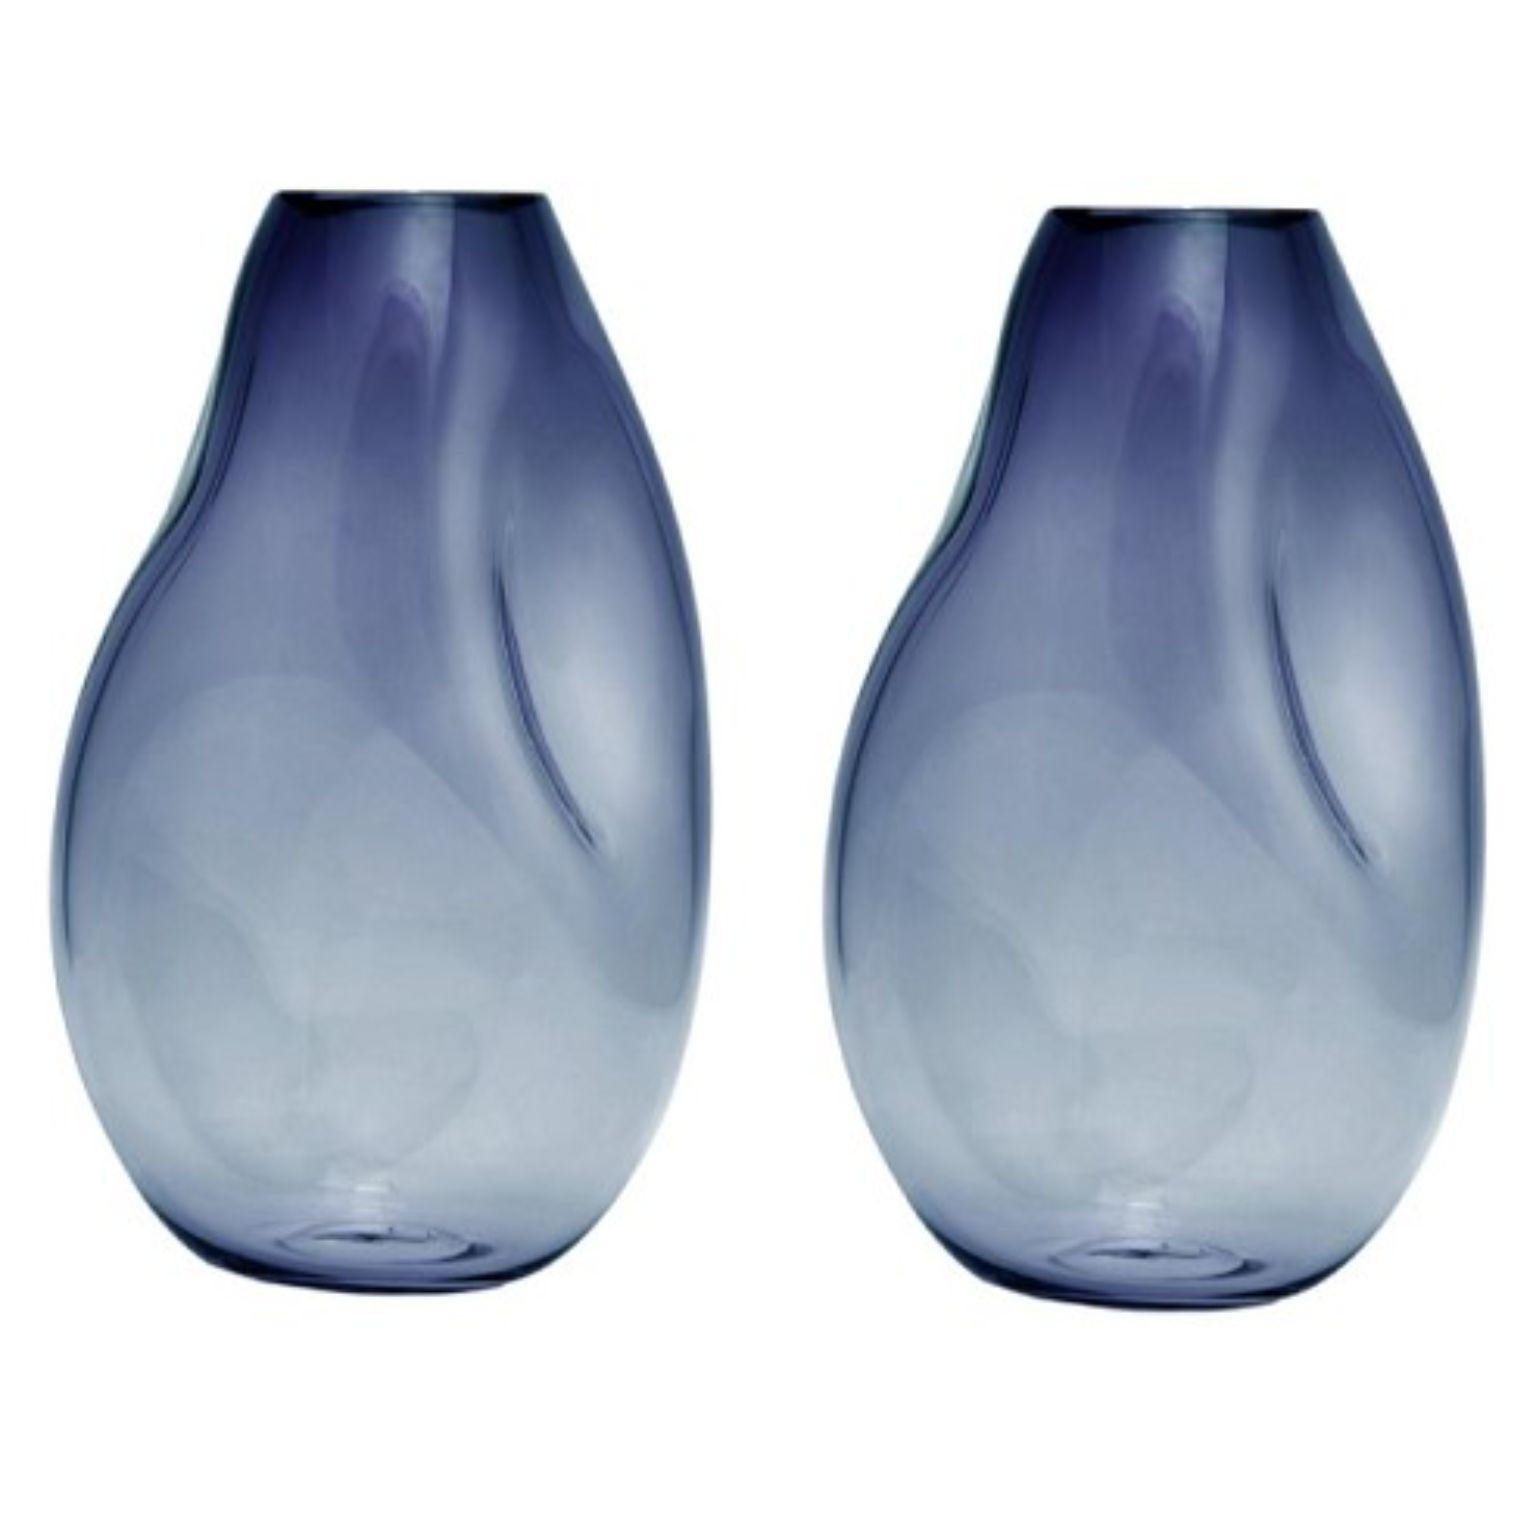 Set of 2 Supernova IV steel blue L vases by ELOA
No UL listed 
Material: glass
Dimensions: D15 x W17 x H41 cm
Also available in different colours and dimensions.

SUPERNOVA is a collection of vases and bowls that, though they don‘t shine
themselves,